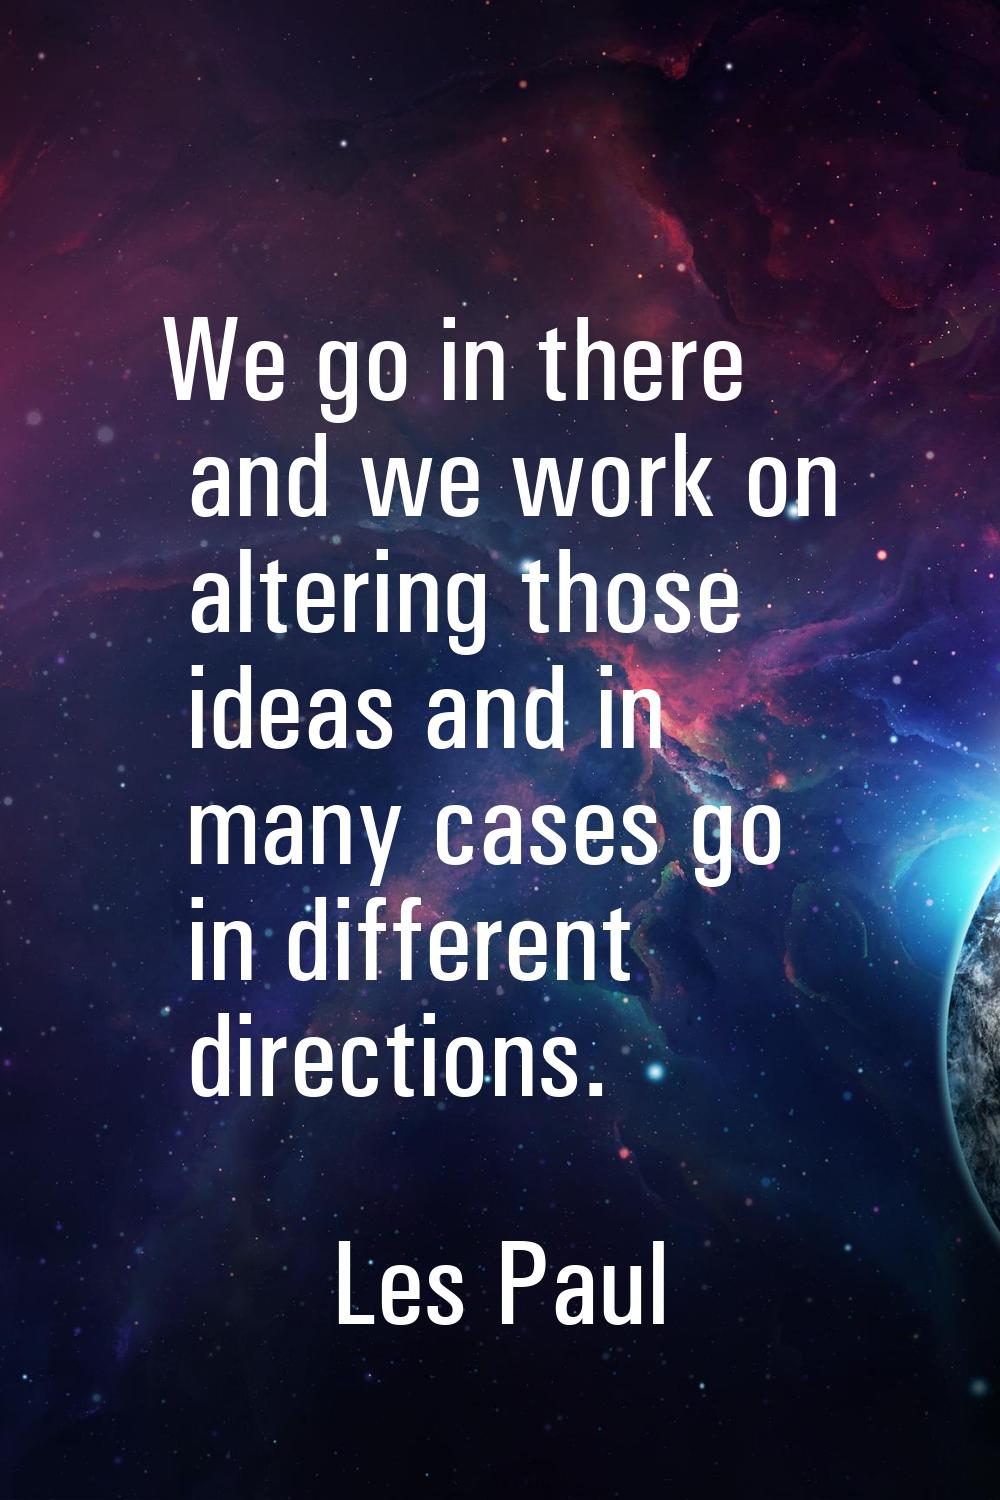 We go in there and we work on altering those ideas and in many cases go in different directions.